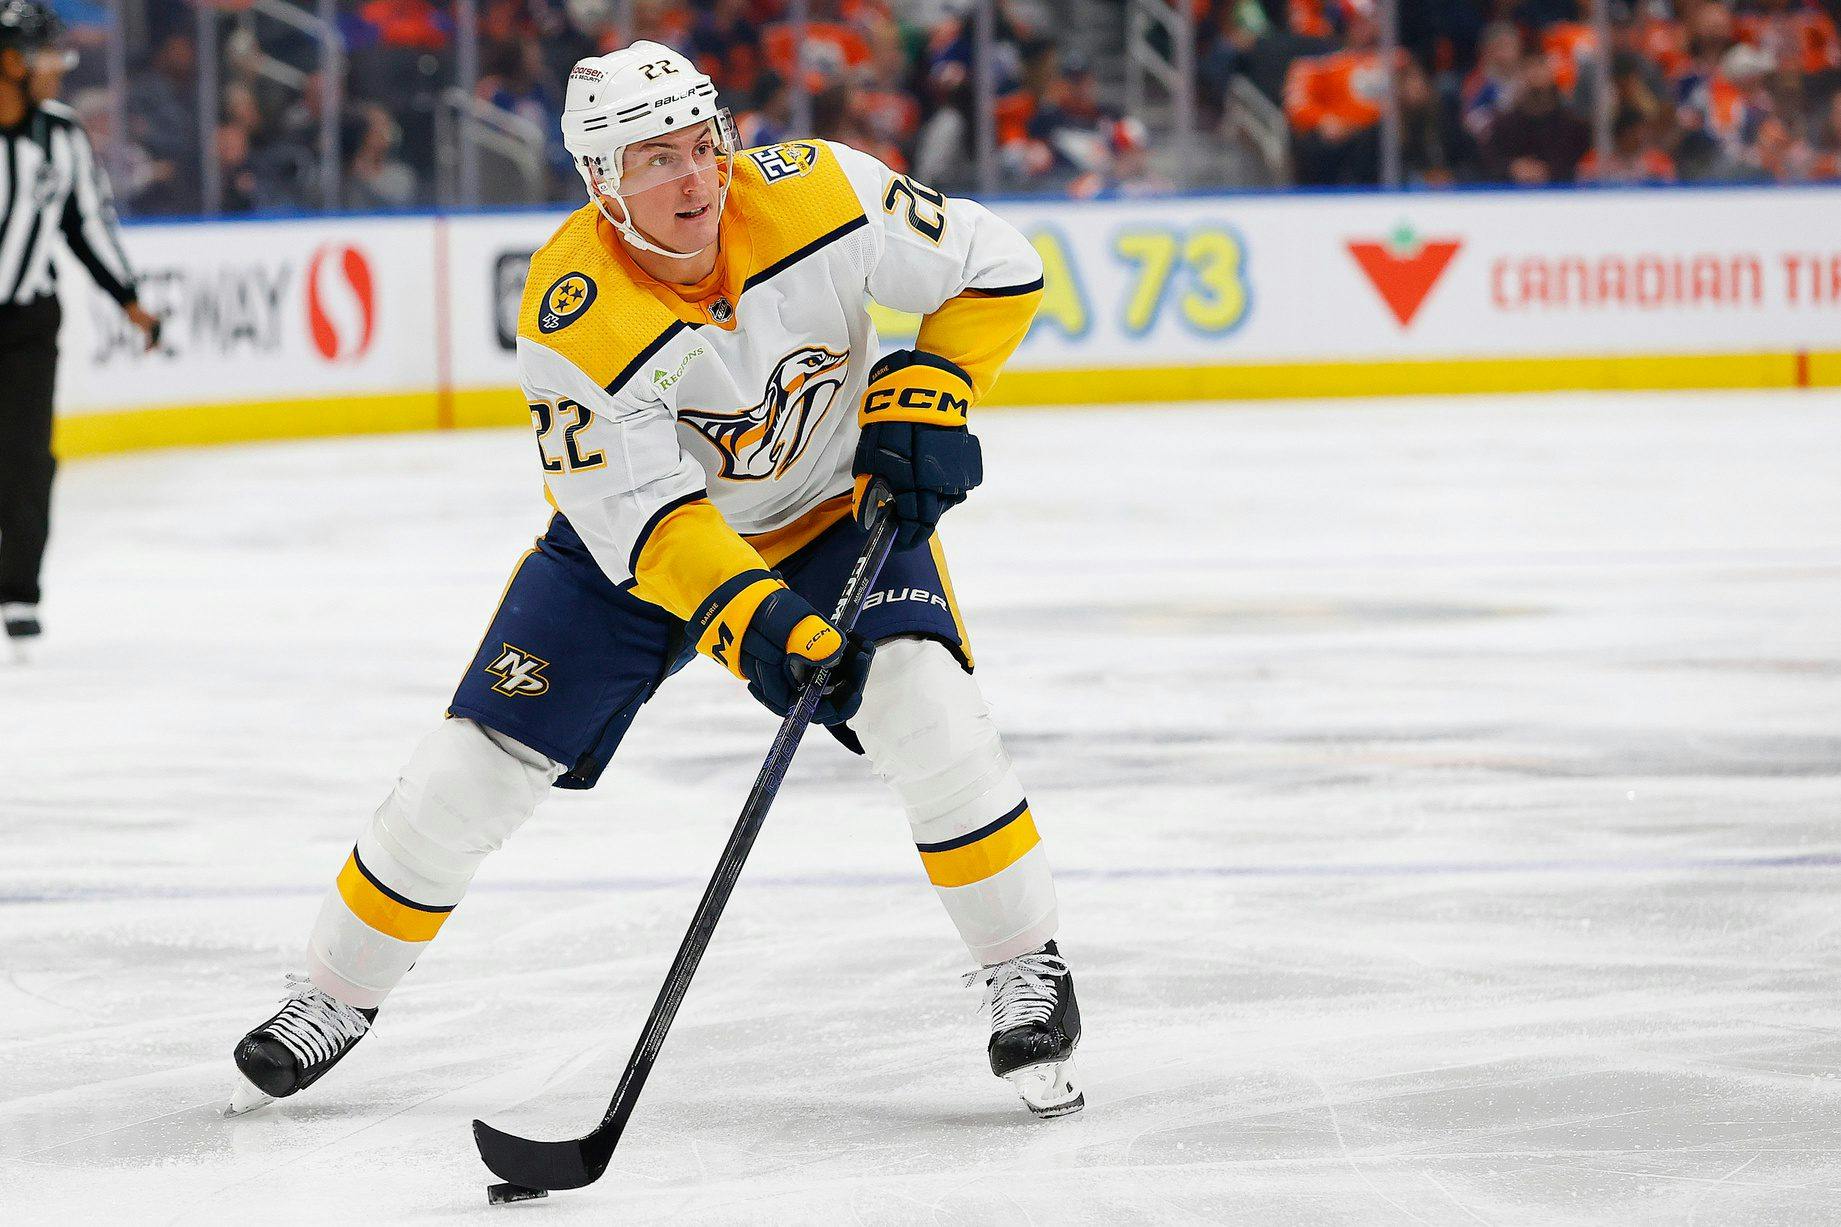 Predators defenseman Tyson Barrie scratched, given permission to seek trade